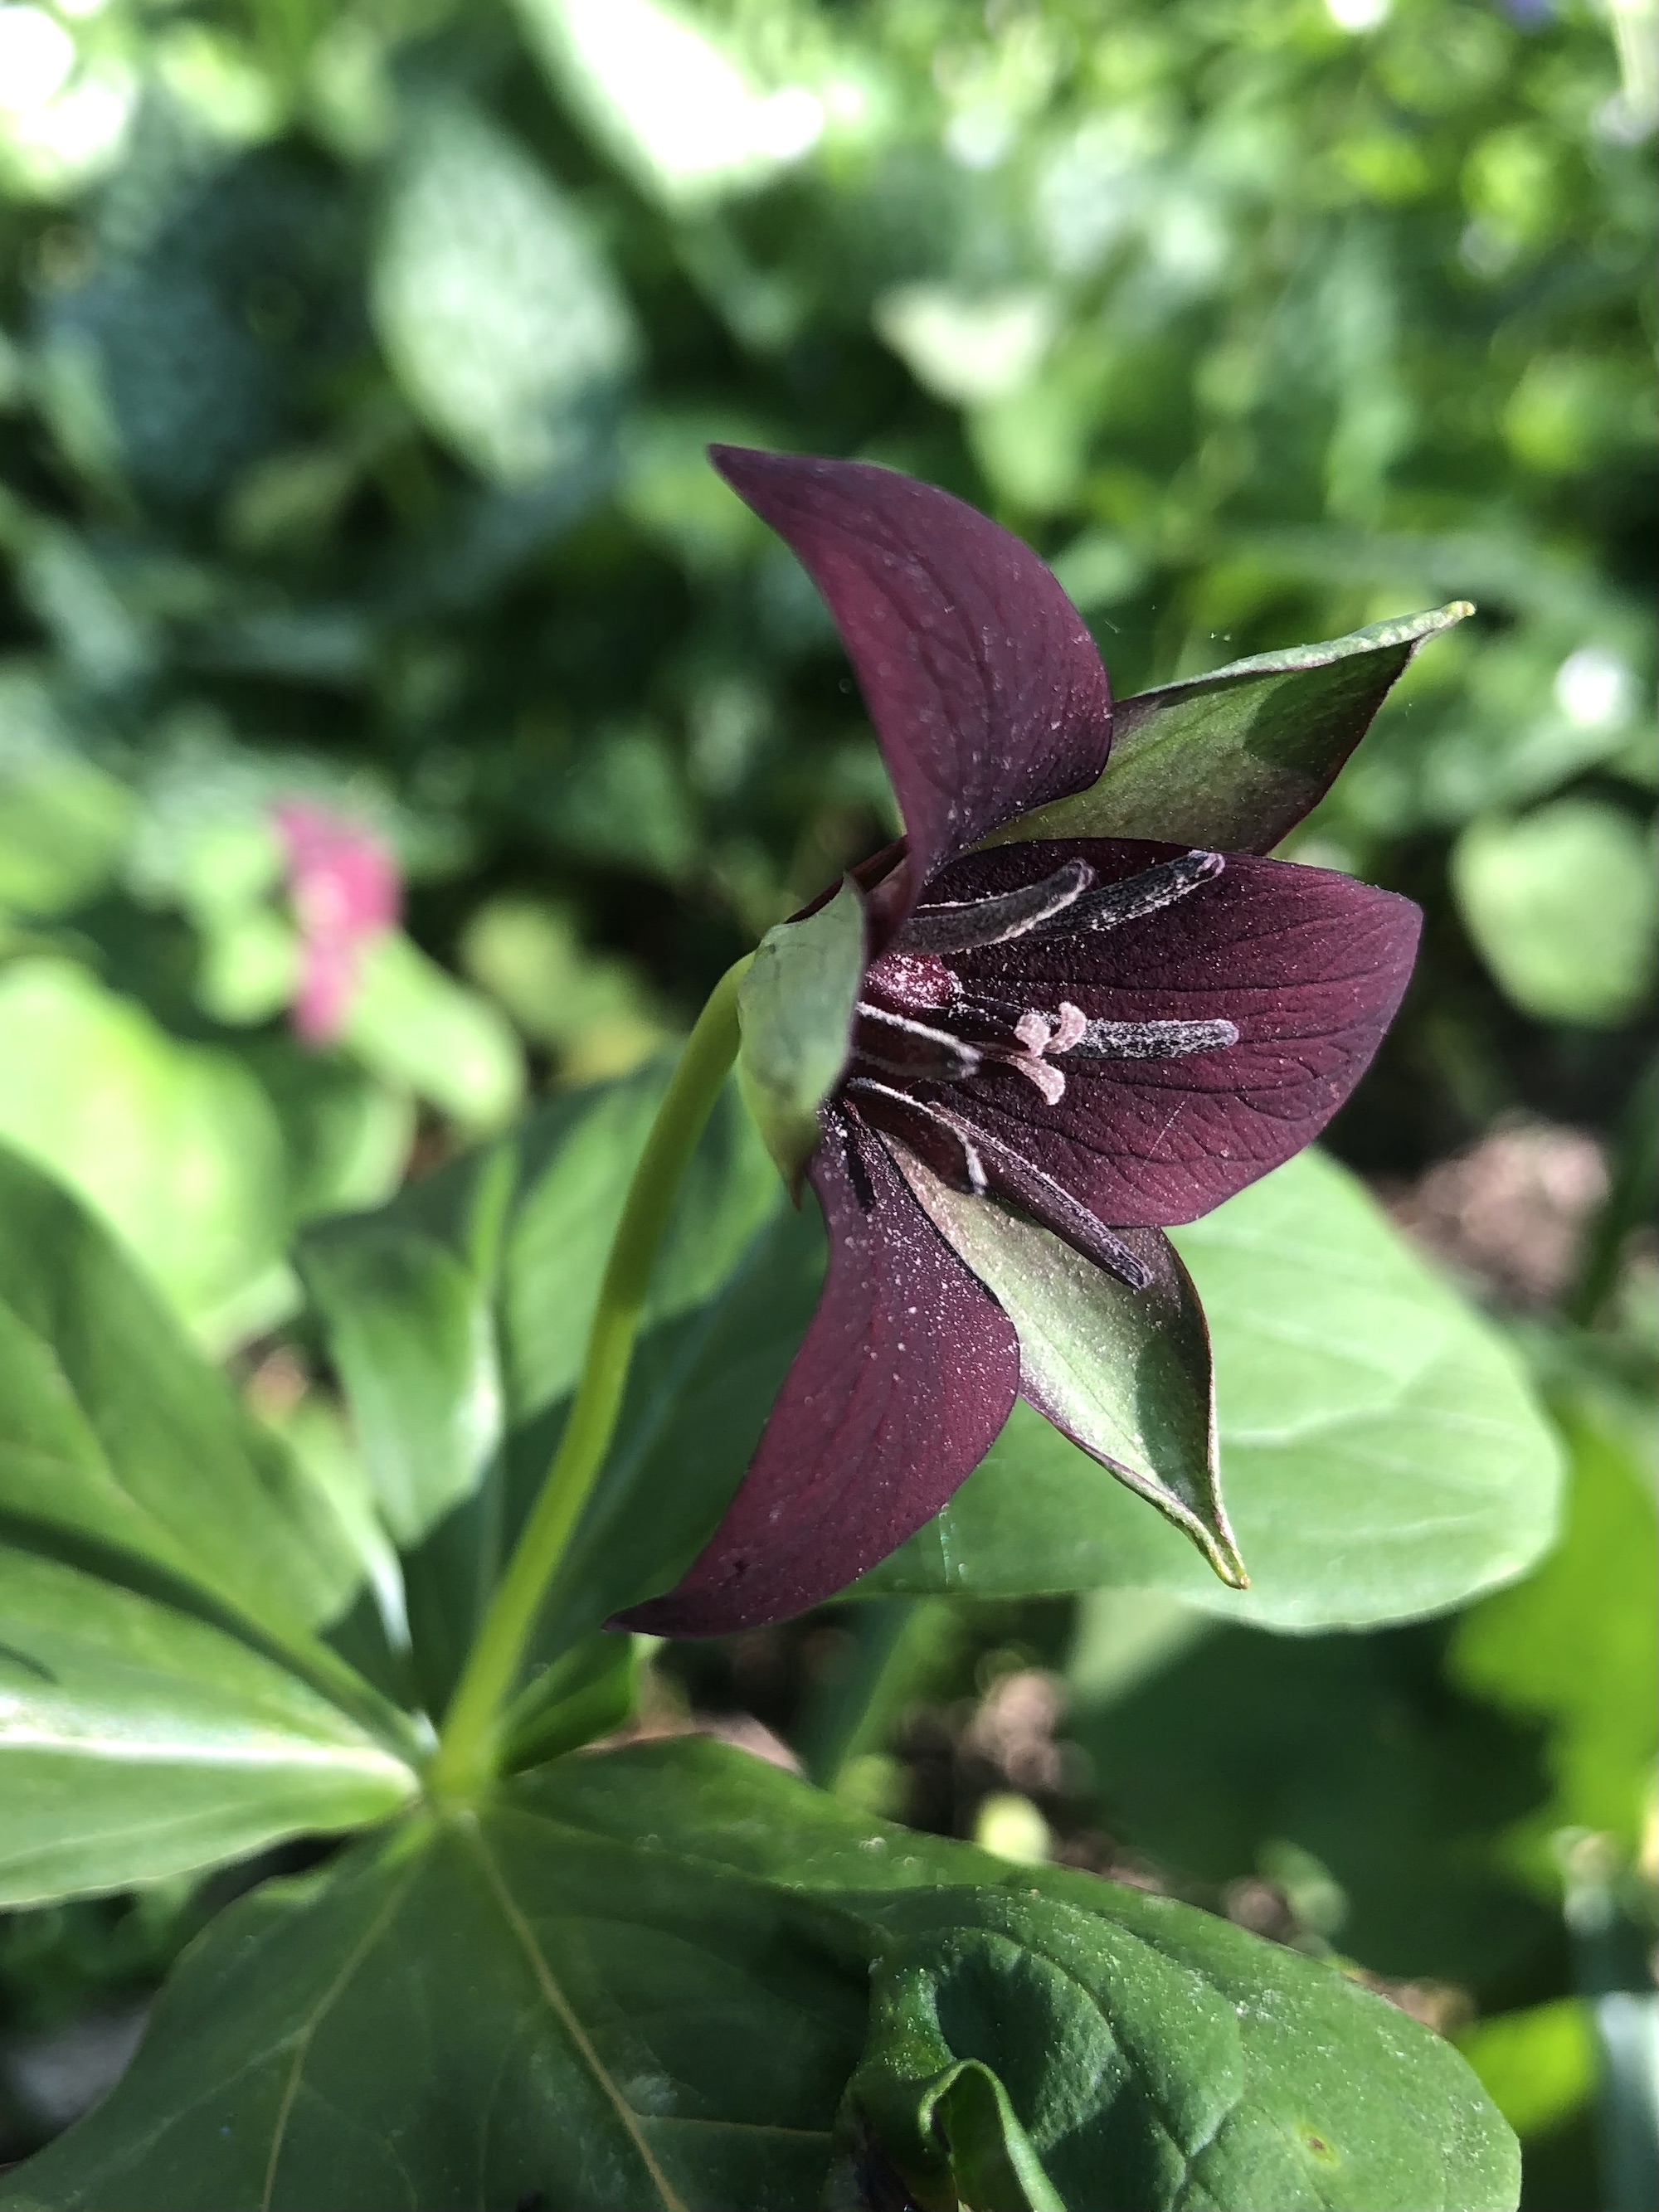 Red Trillium in Nakoma garden in Madison, Wisconsin on May 15, 2022.